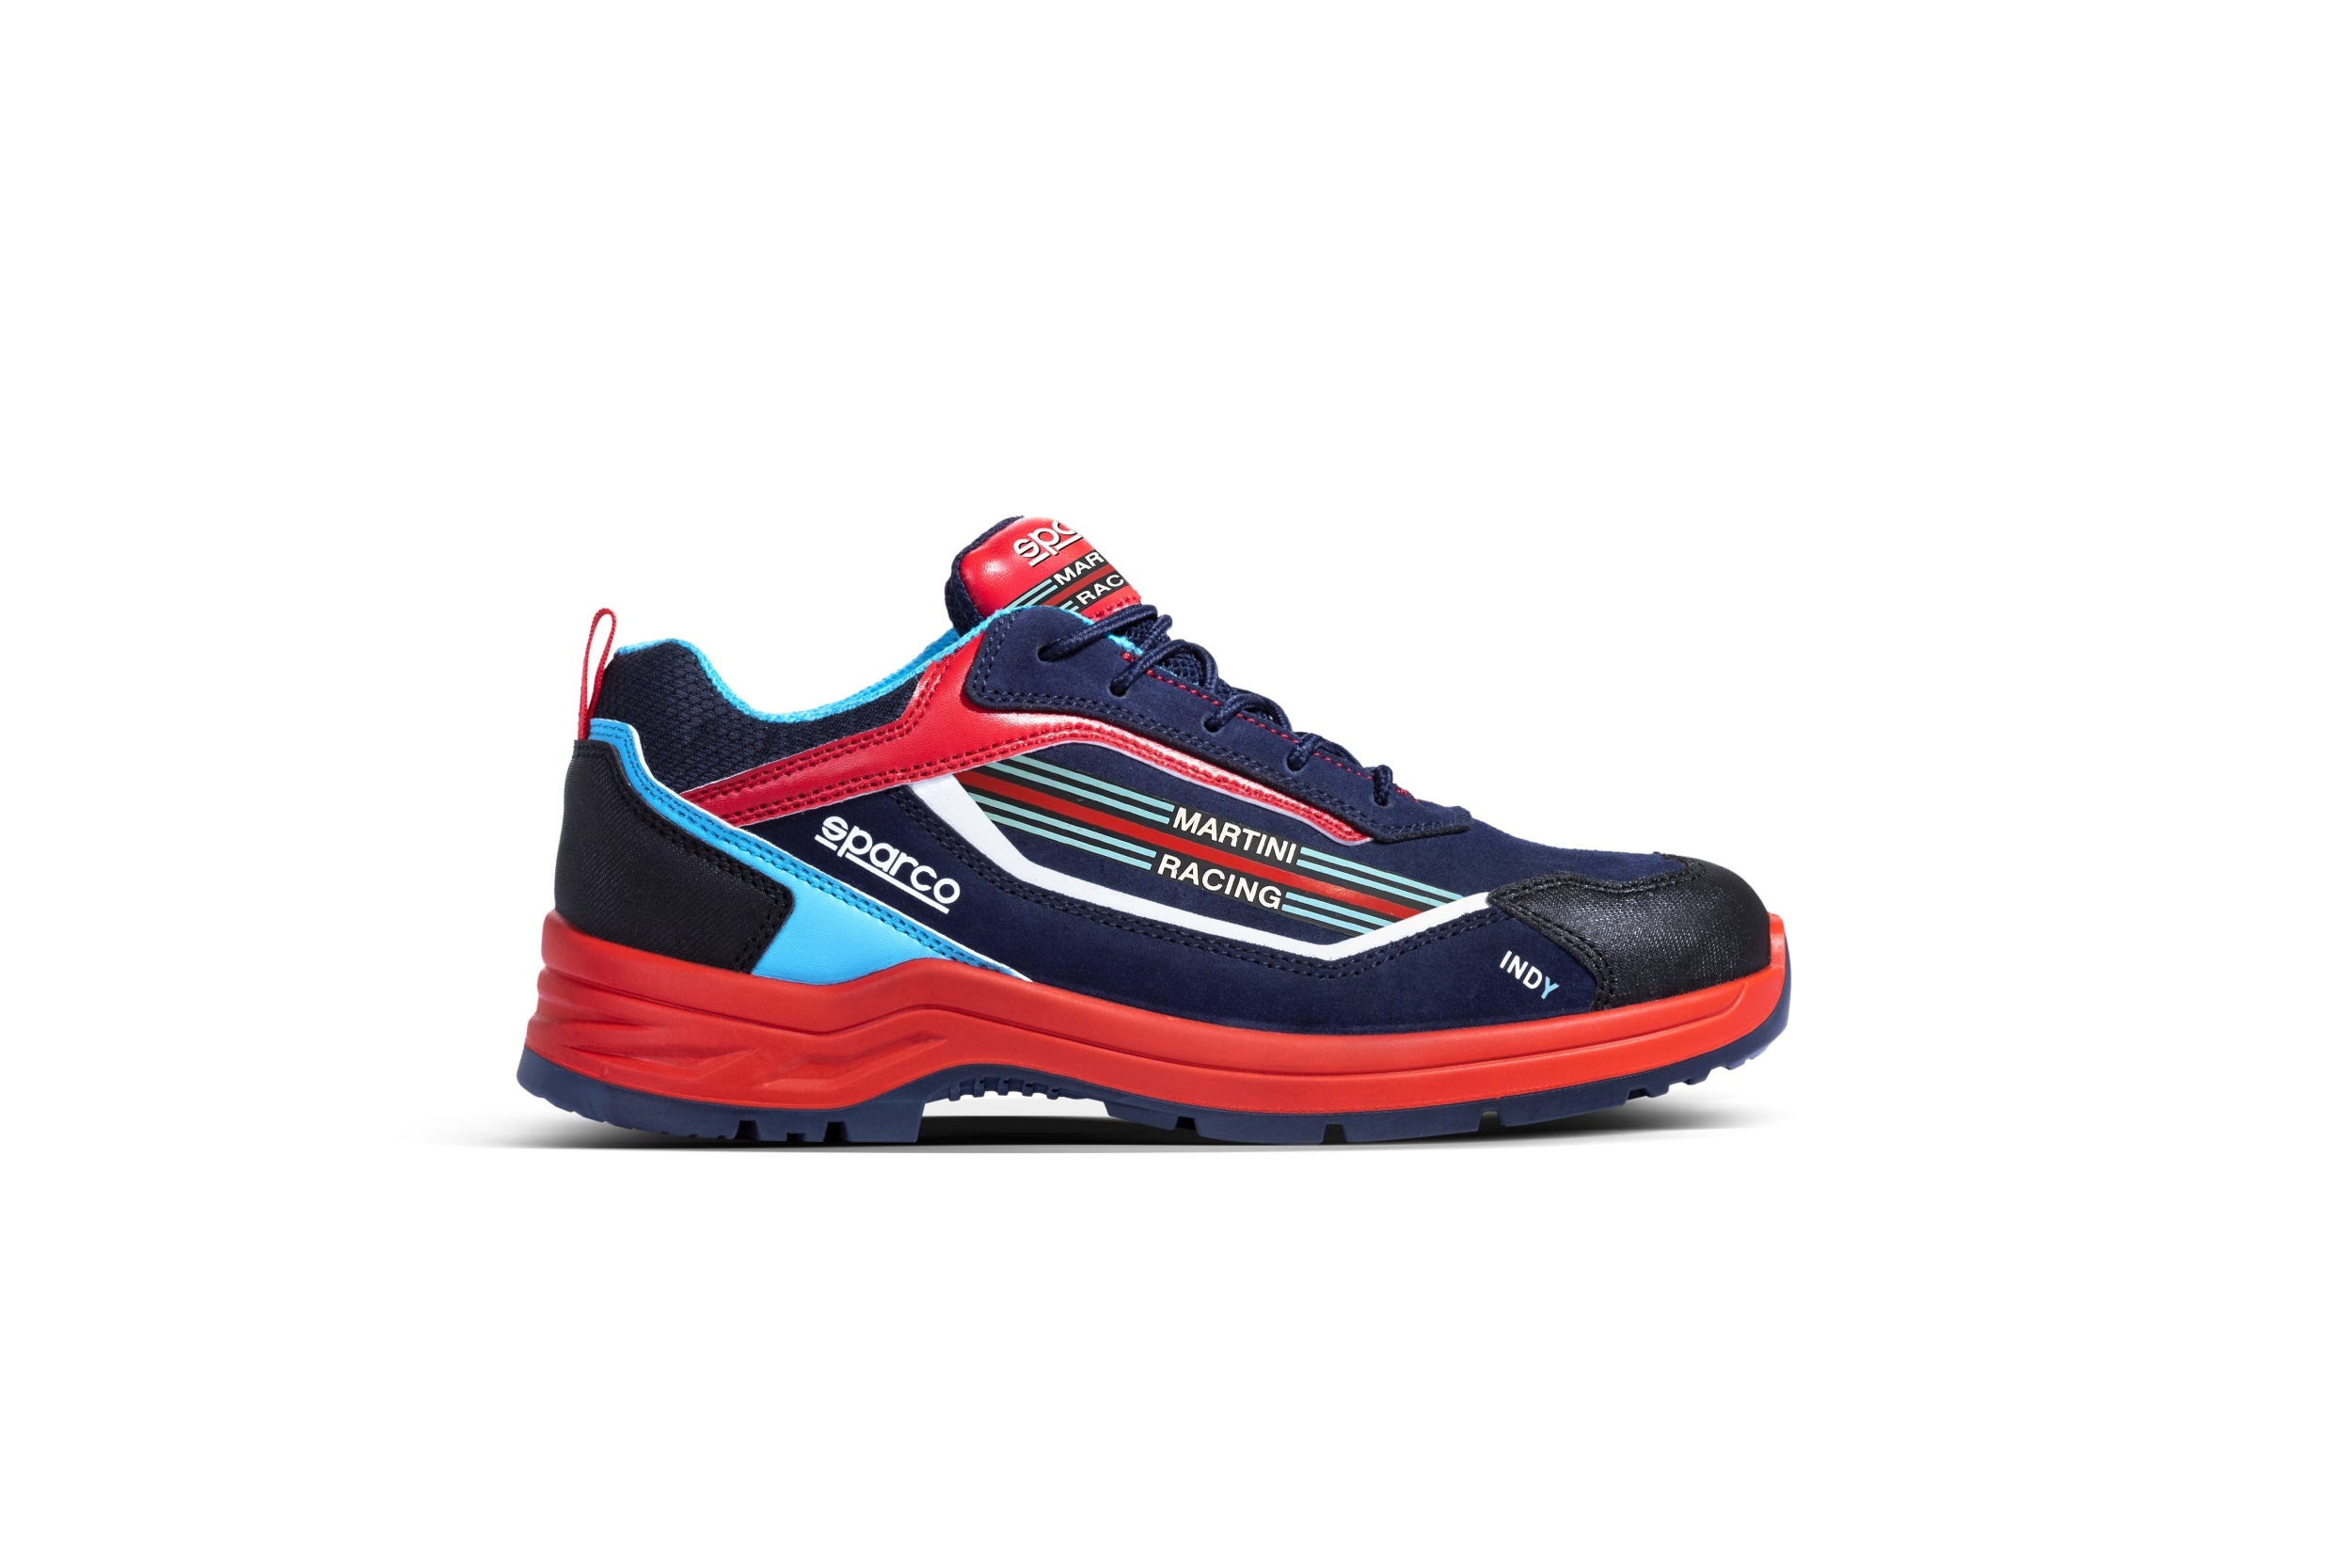 SPARCO 07537MR44BMRS Indy ESD S3 MARTINI RACING Shoes, navy blue/red, size 44 Photo-2 